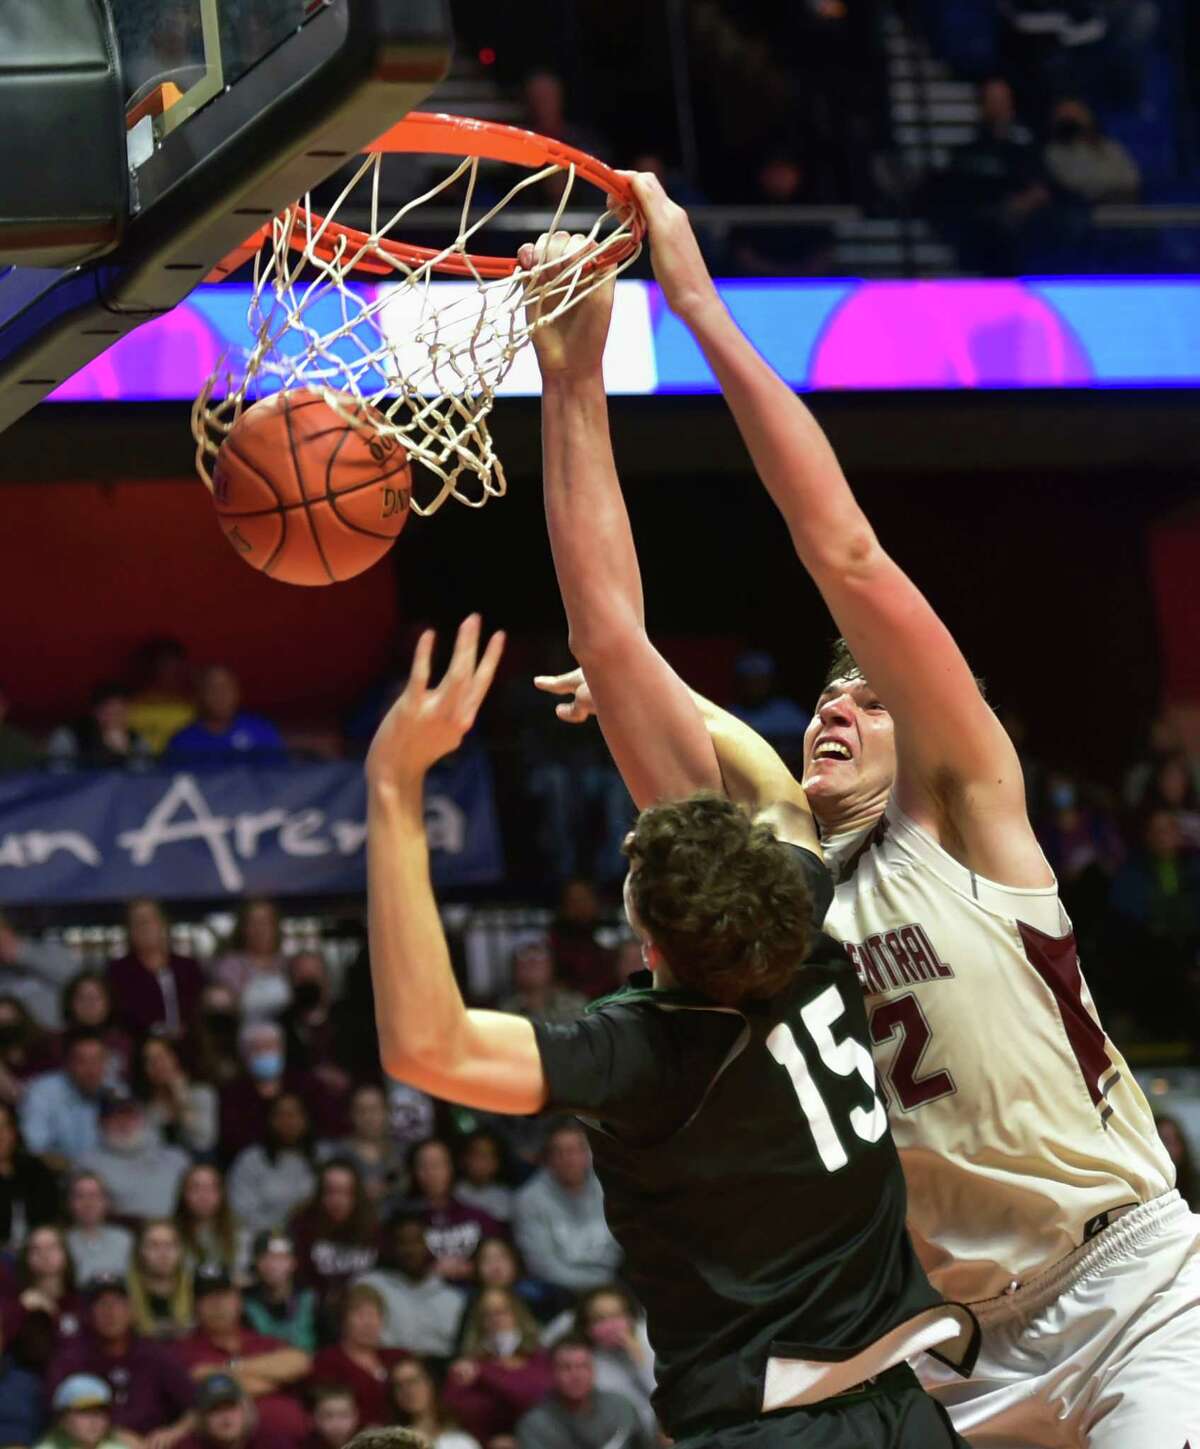 Bristol Central's Donovan Clingan (32) slam dunks the ball during Div. II Boys Basketball state championship action against Northwest Catholic at Mohegan Sun Arena in Uncasville, Conn., on Saturday March 19, 2022.